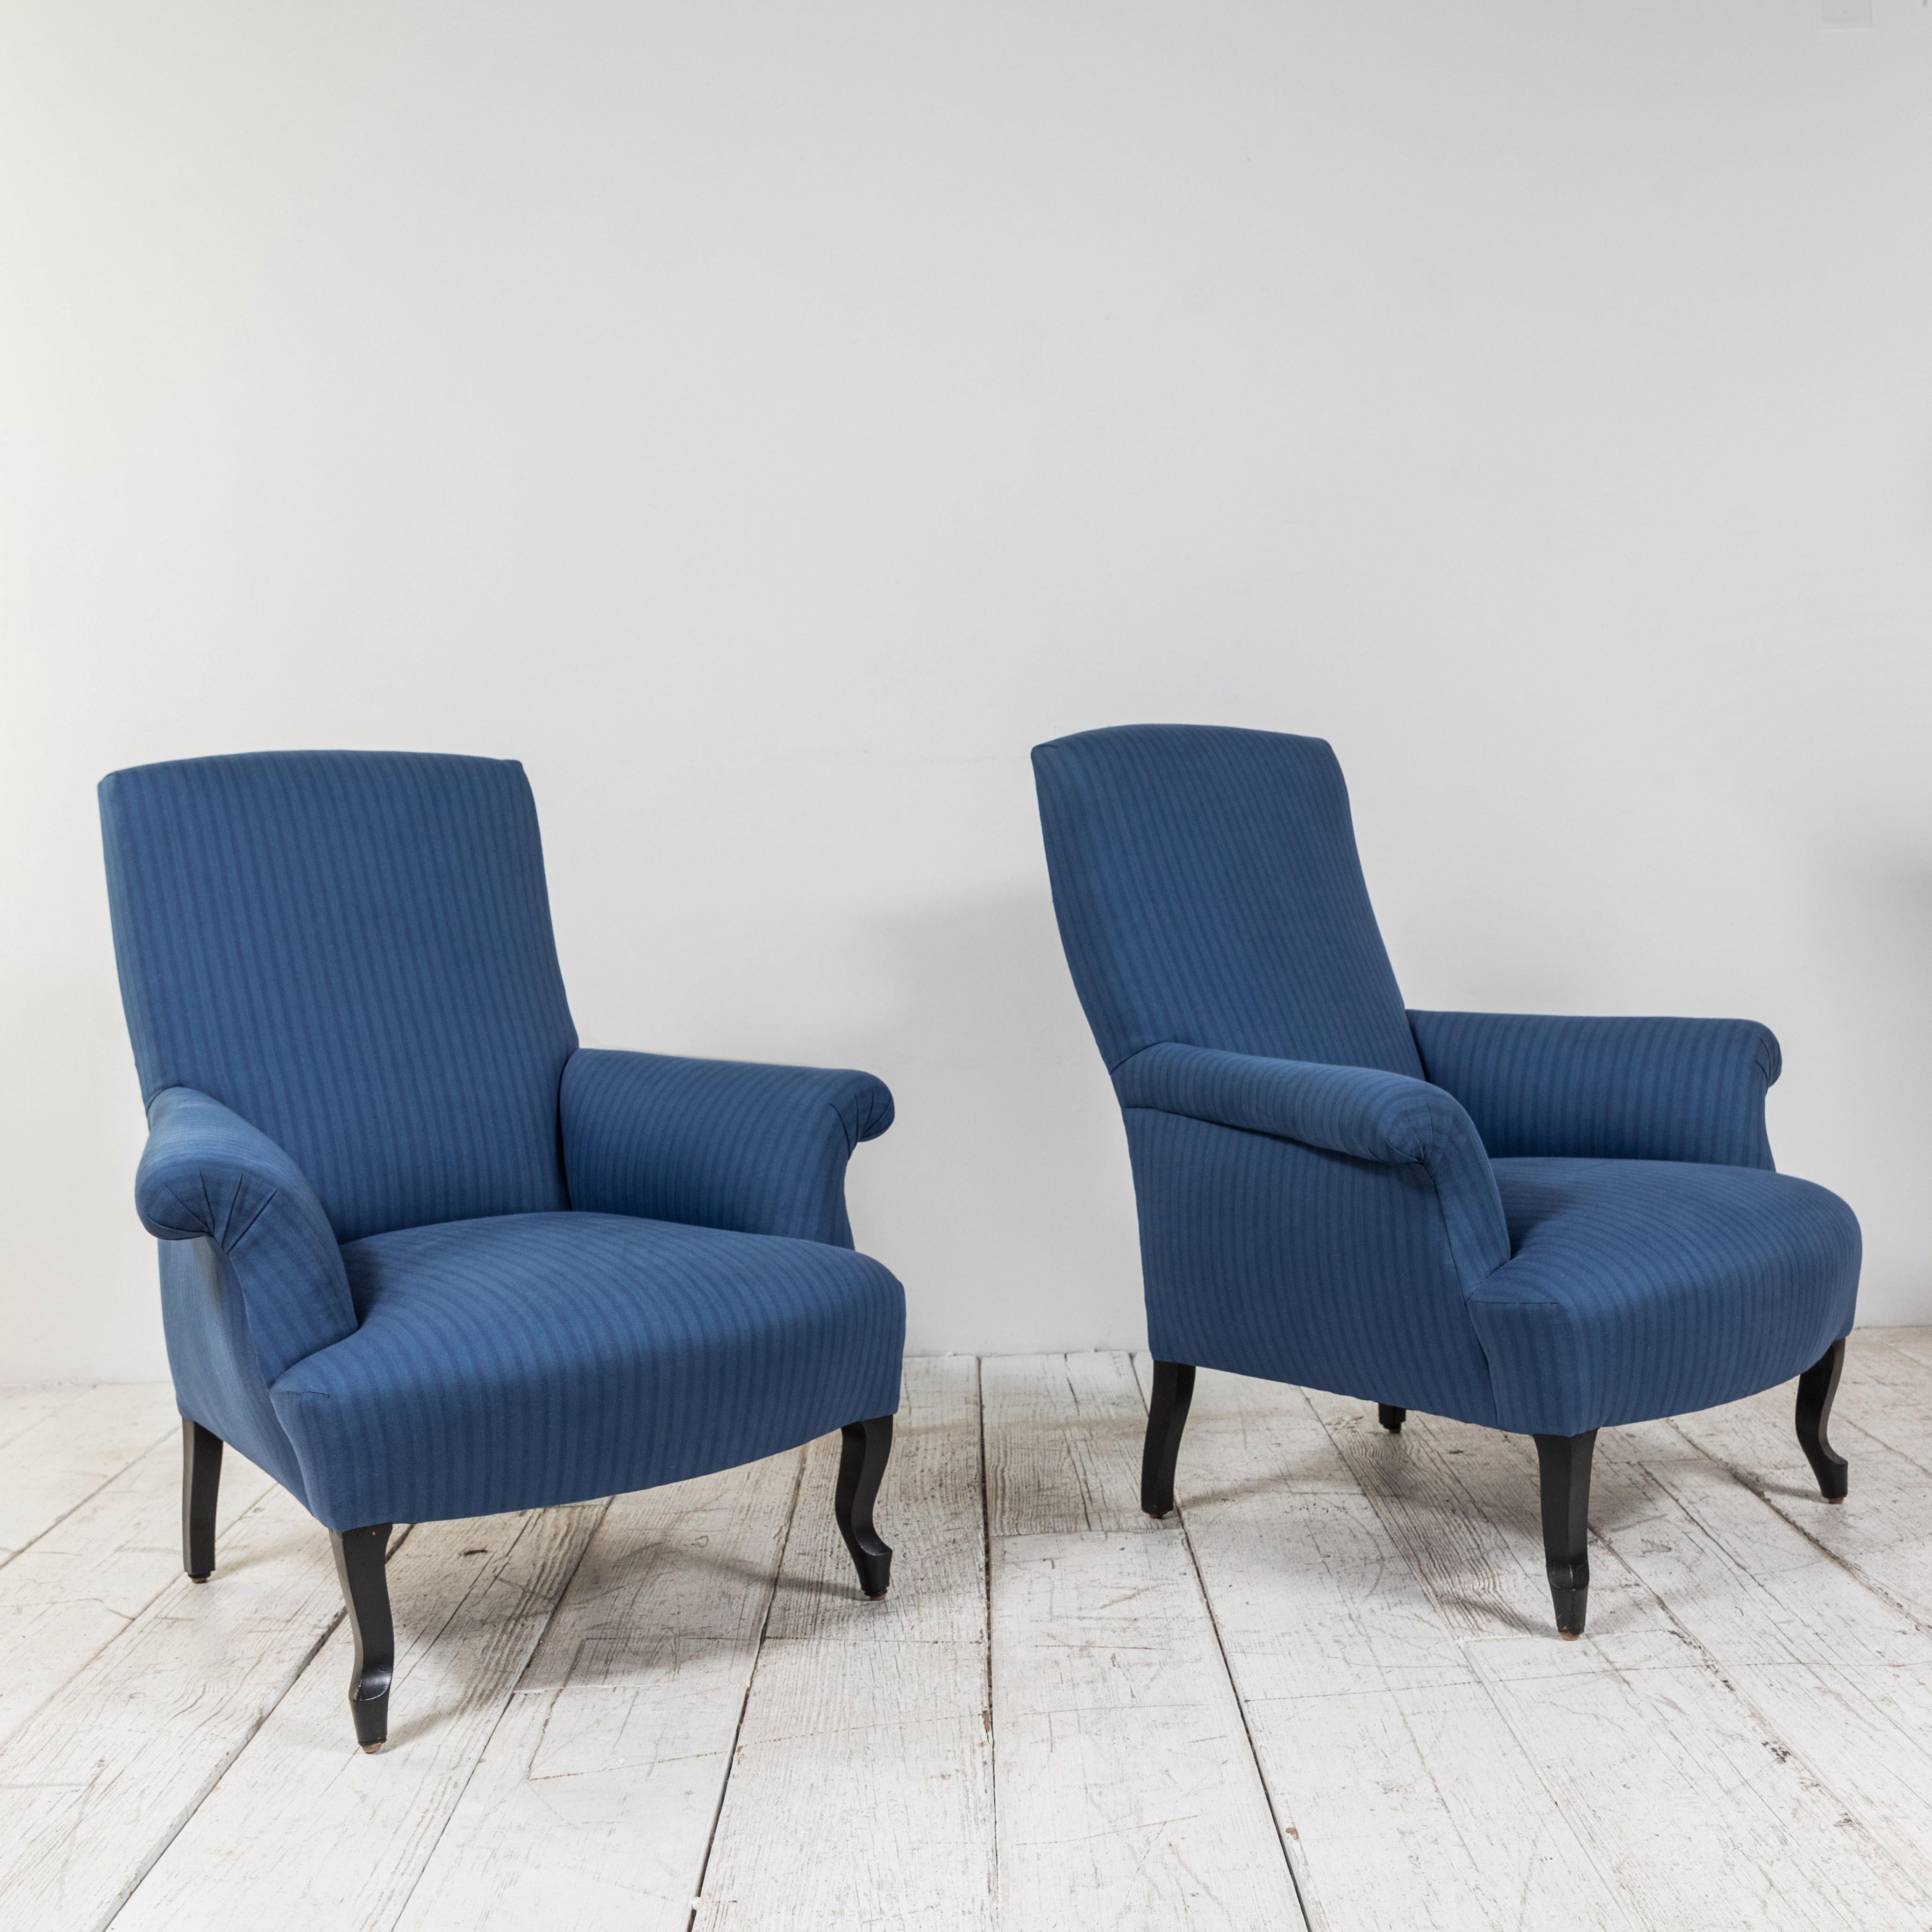 20th Century Pair of French Rolled Arm Club Chairs Upholstered in Blue Tonal Striped Fabric